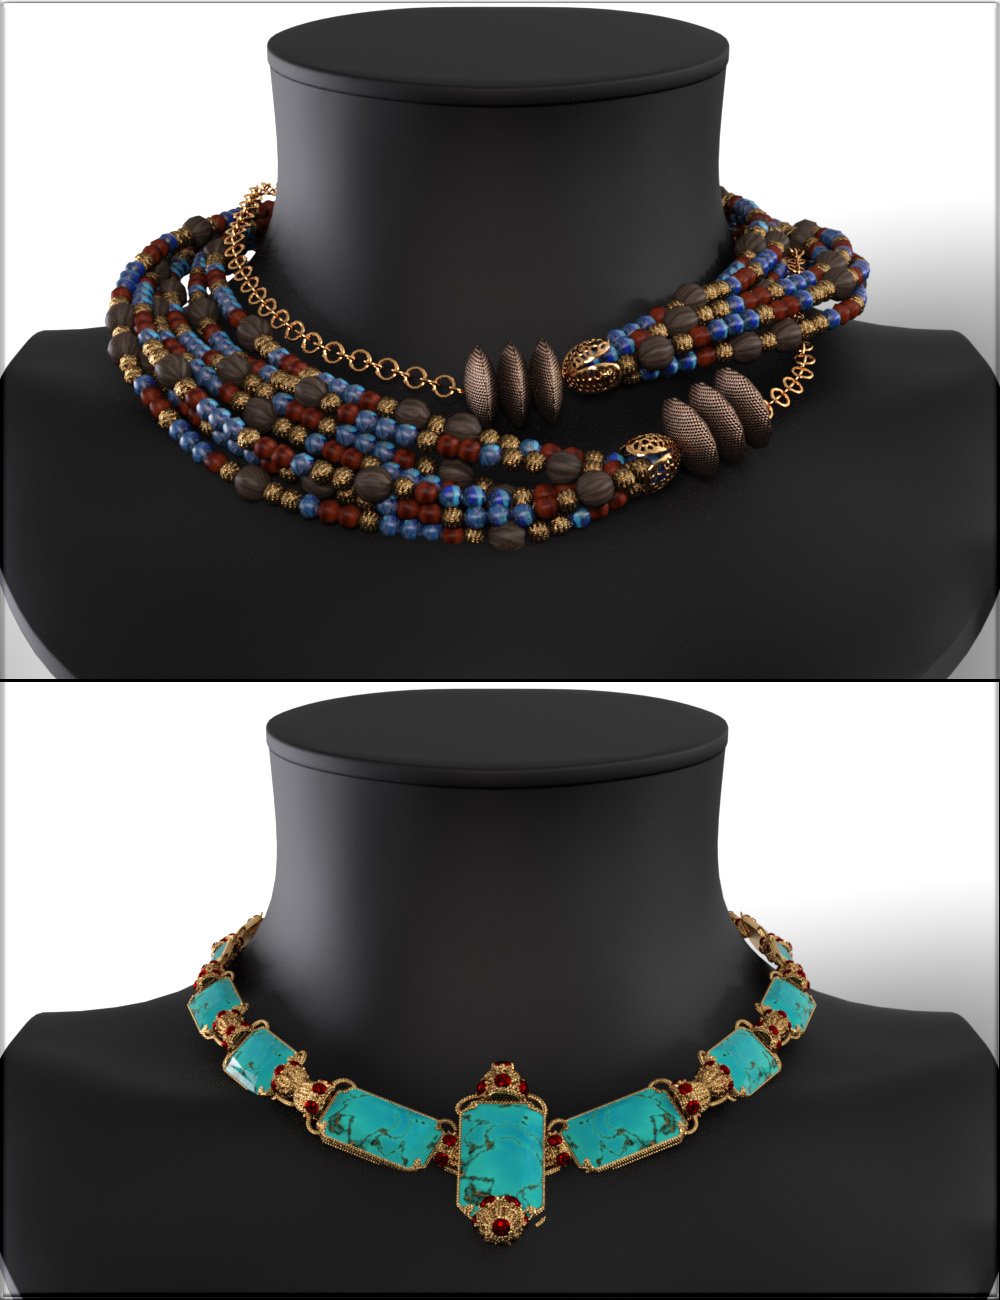 Costume Jewelry Shaders for Iray by: vyktohria, 3D Models by Daz 3D